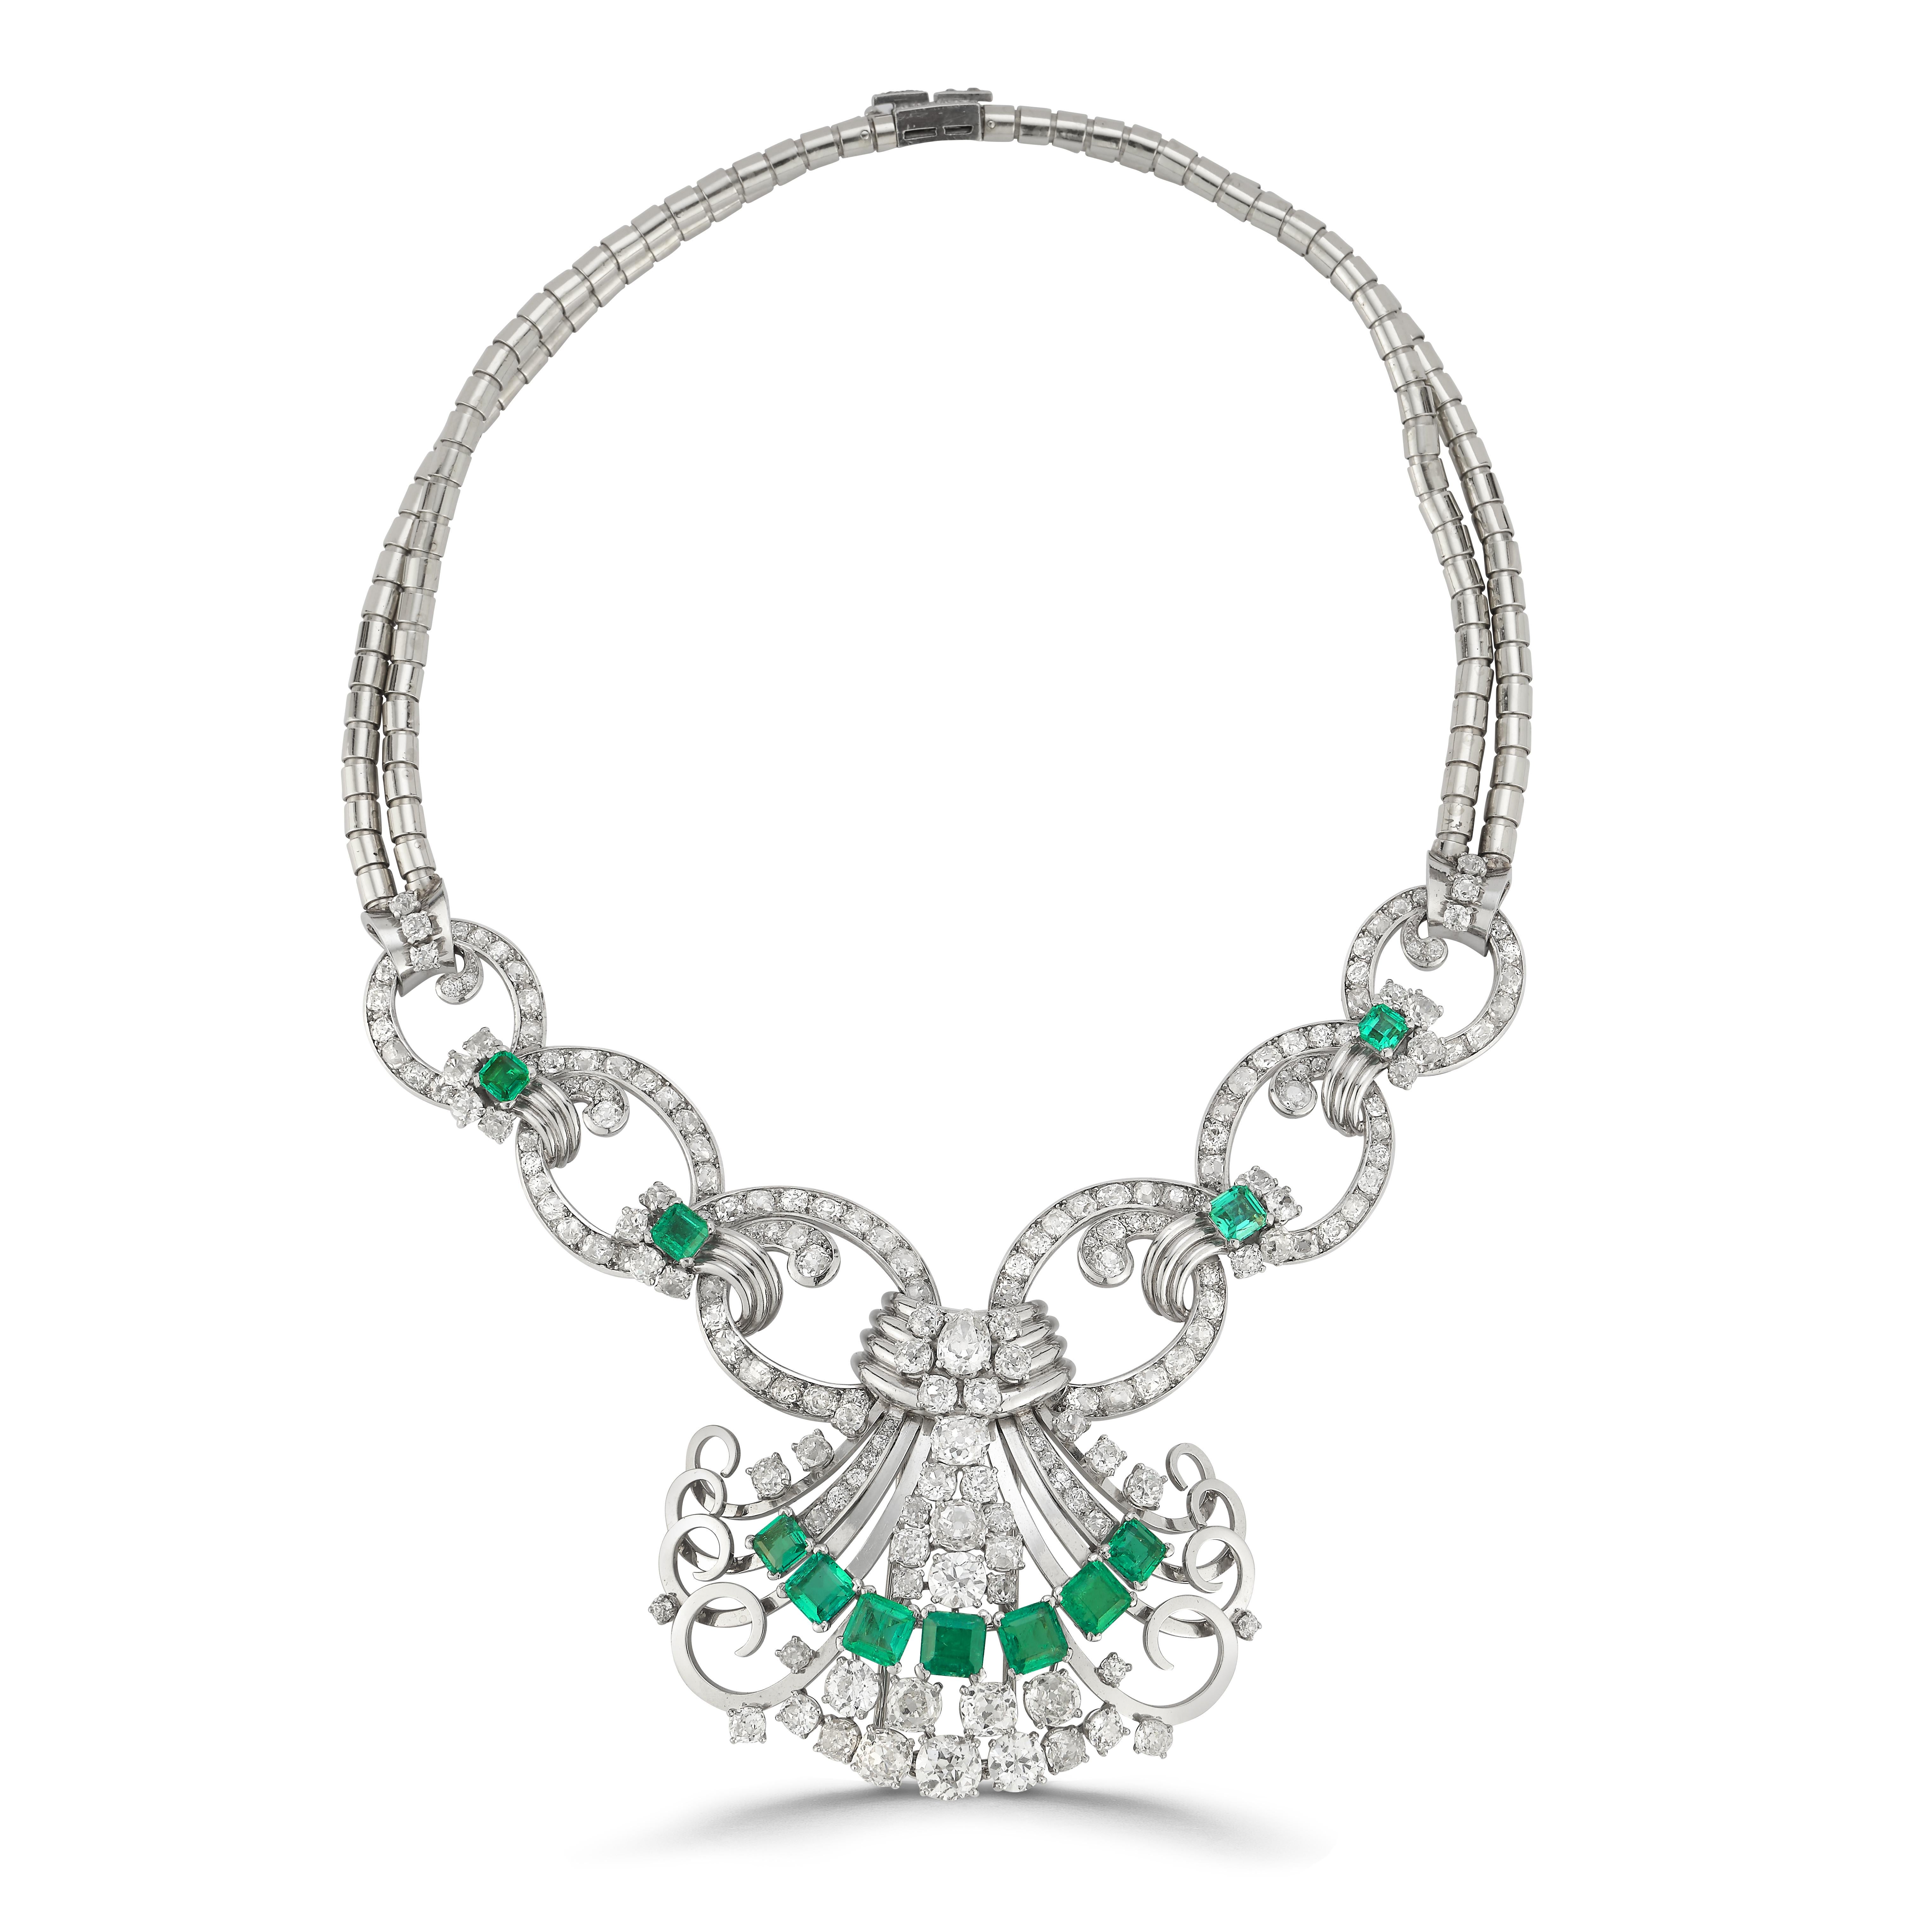 Mauboussin Art Deco Emerald & Diamond Pendant Necklace

A platinum and 18 karat white gold transformable pendant necklace set with  antique diamonds and emeralds. The necklace can be worn two ways, both with and without the pendant. The pendant is